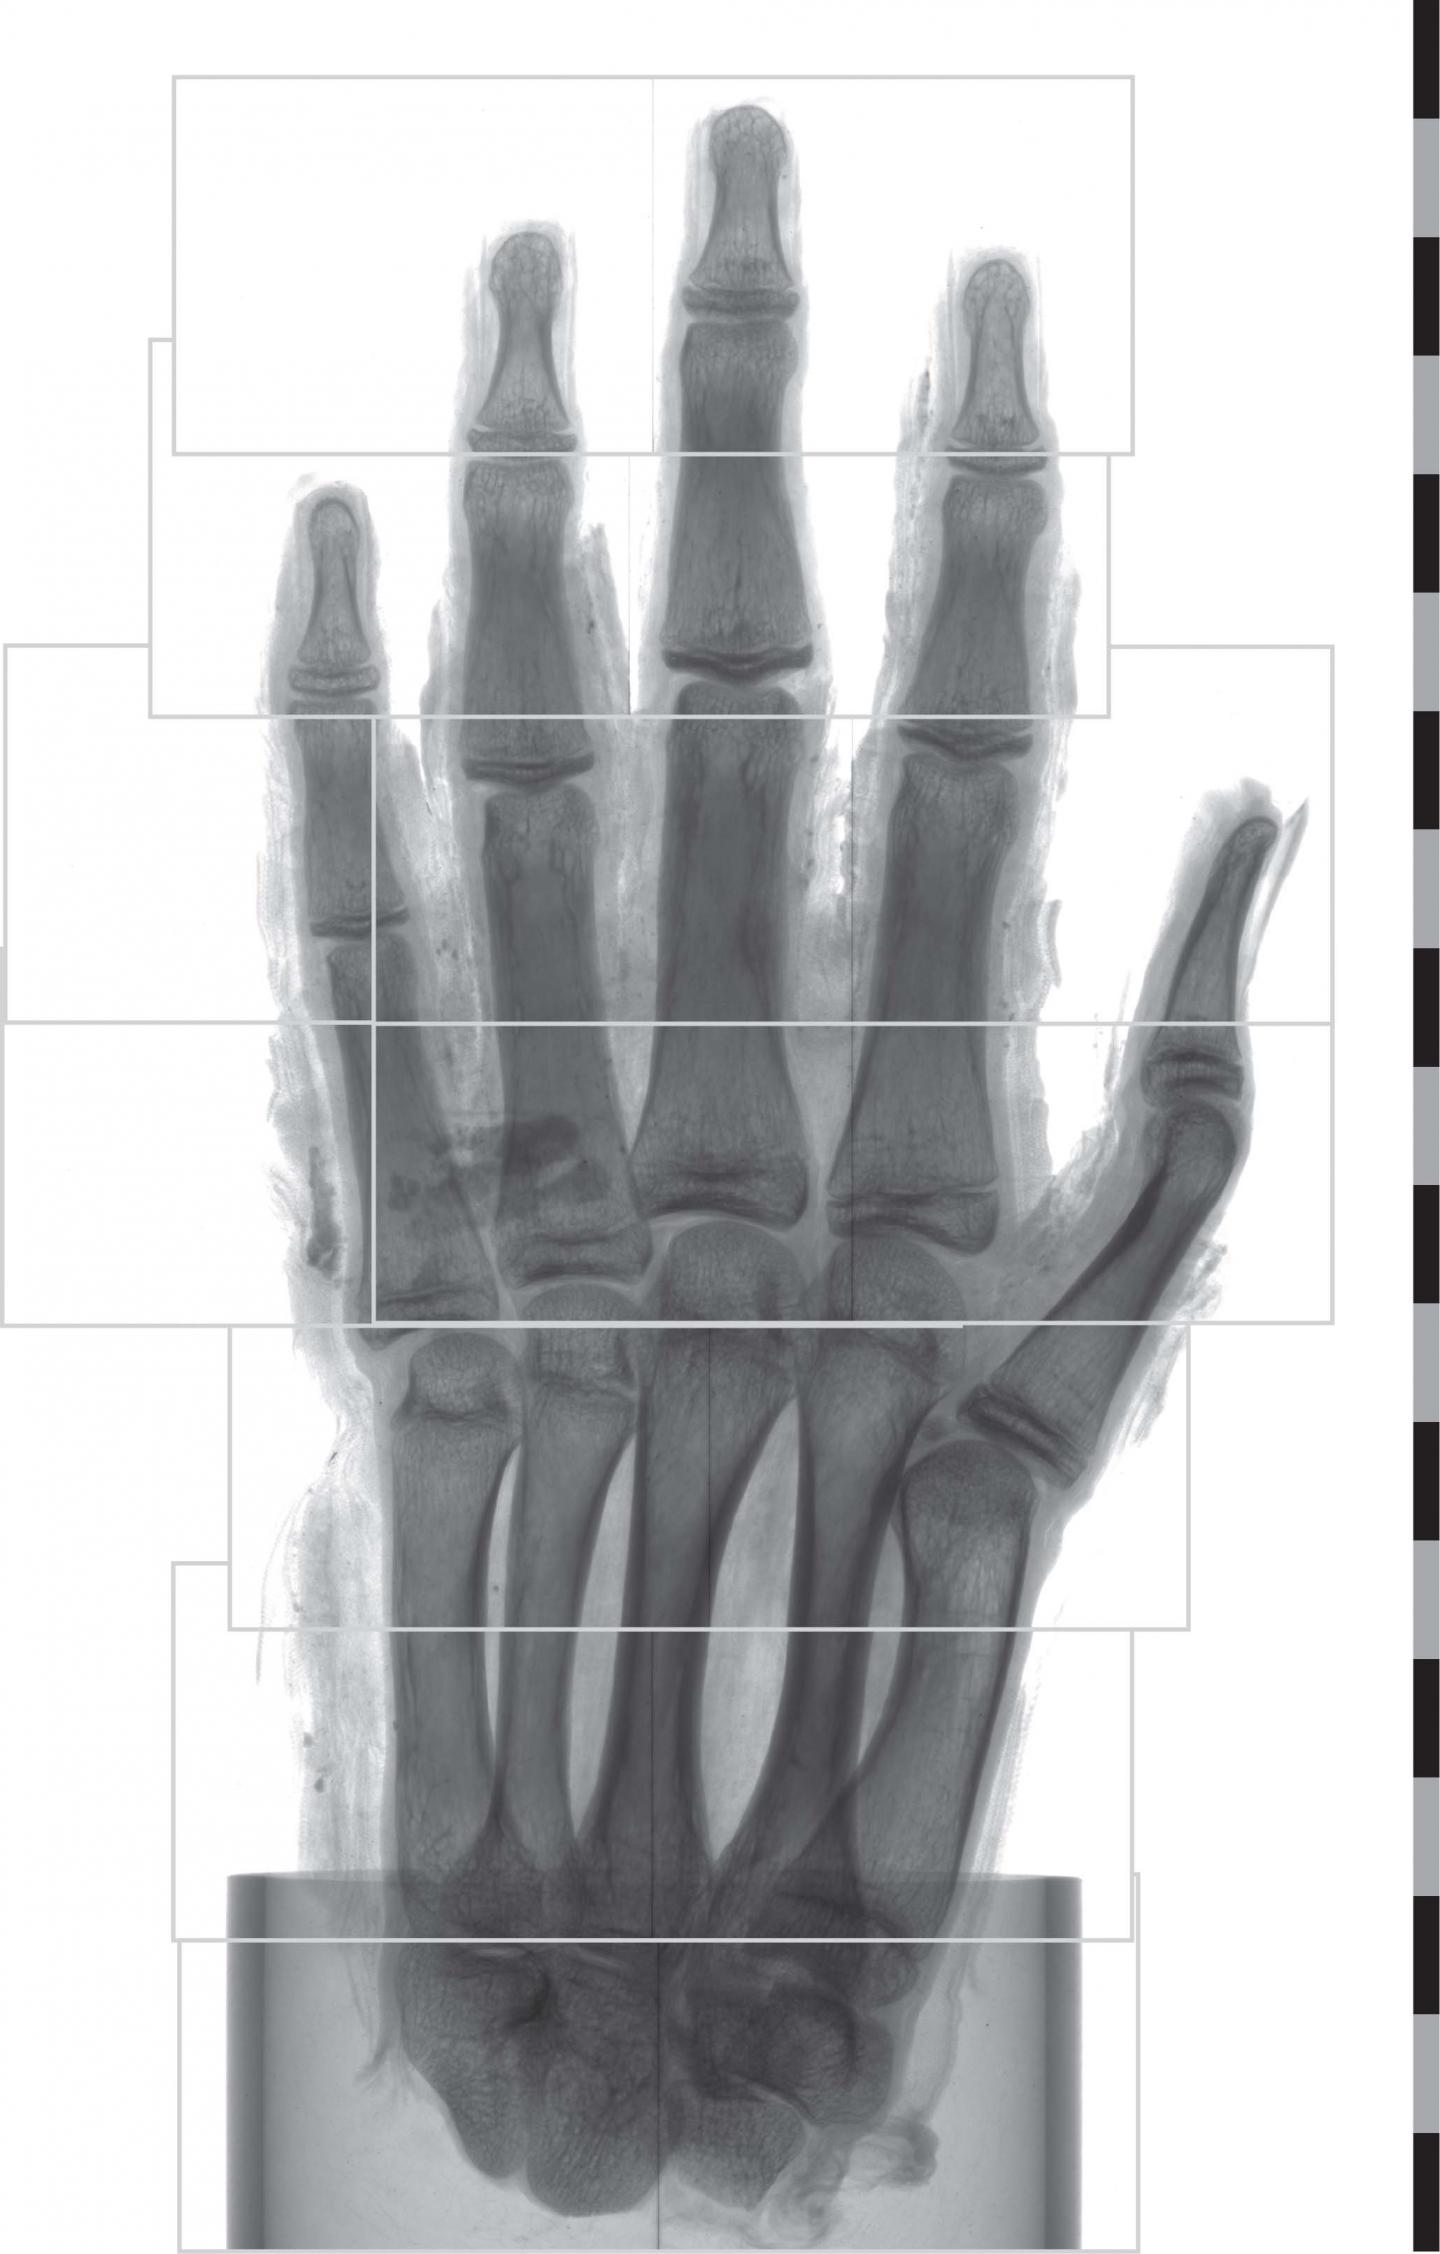 Regions for Tomographic Scans in Mummy Hand